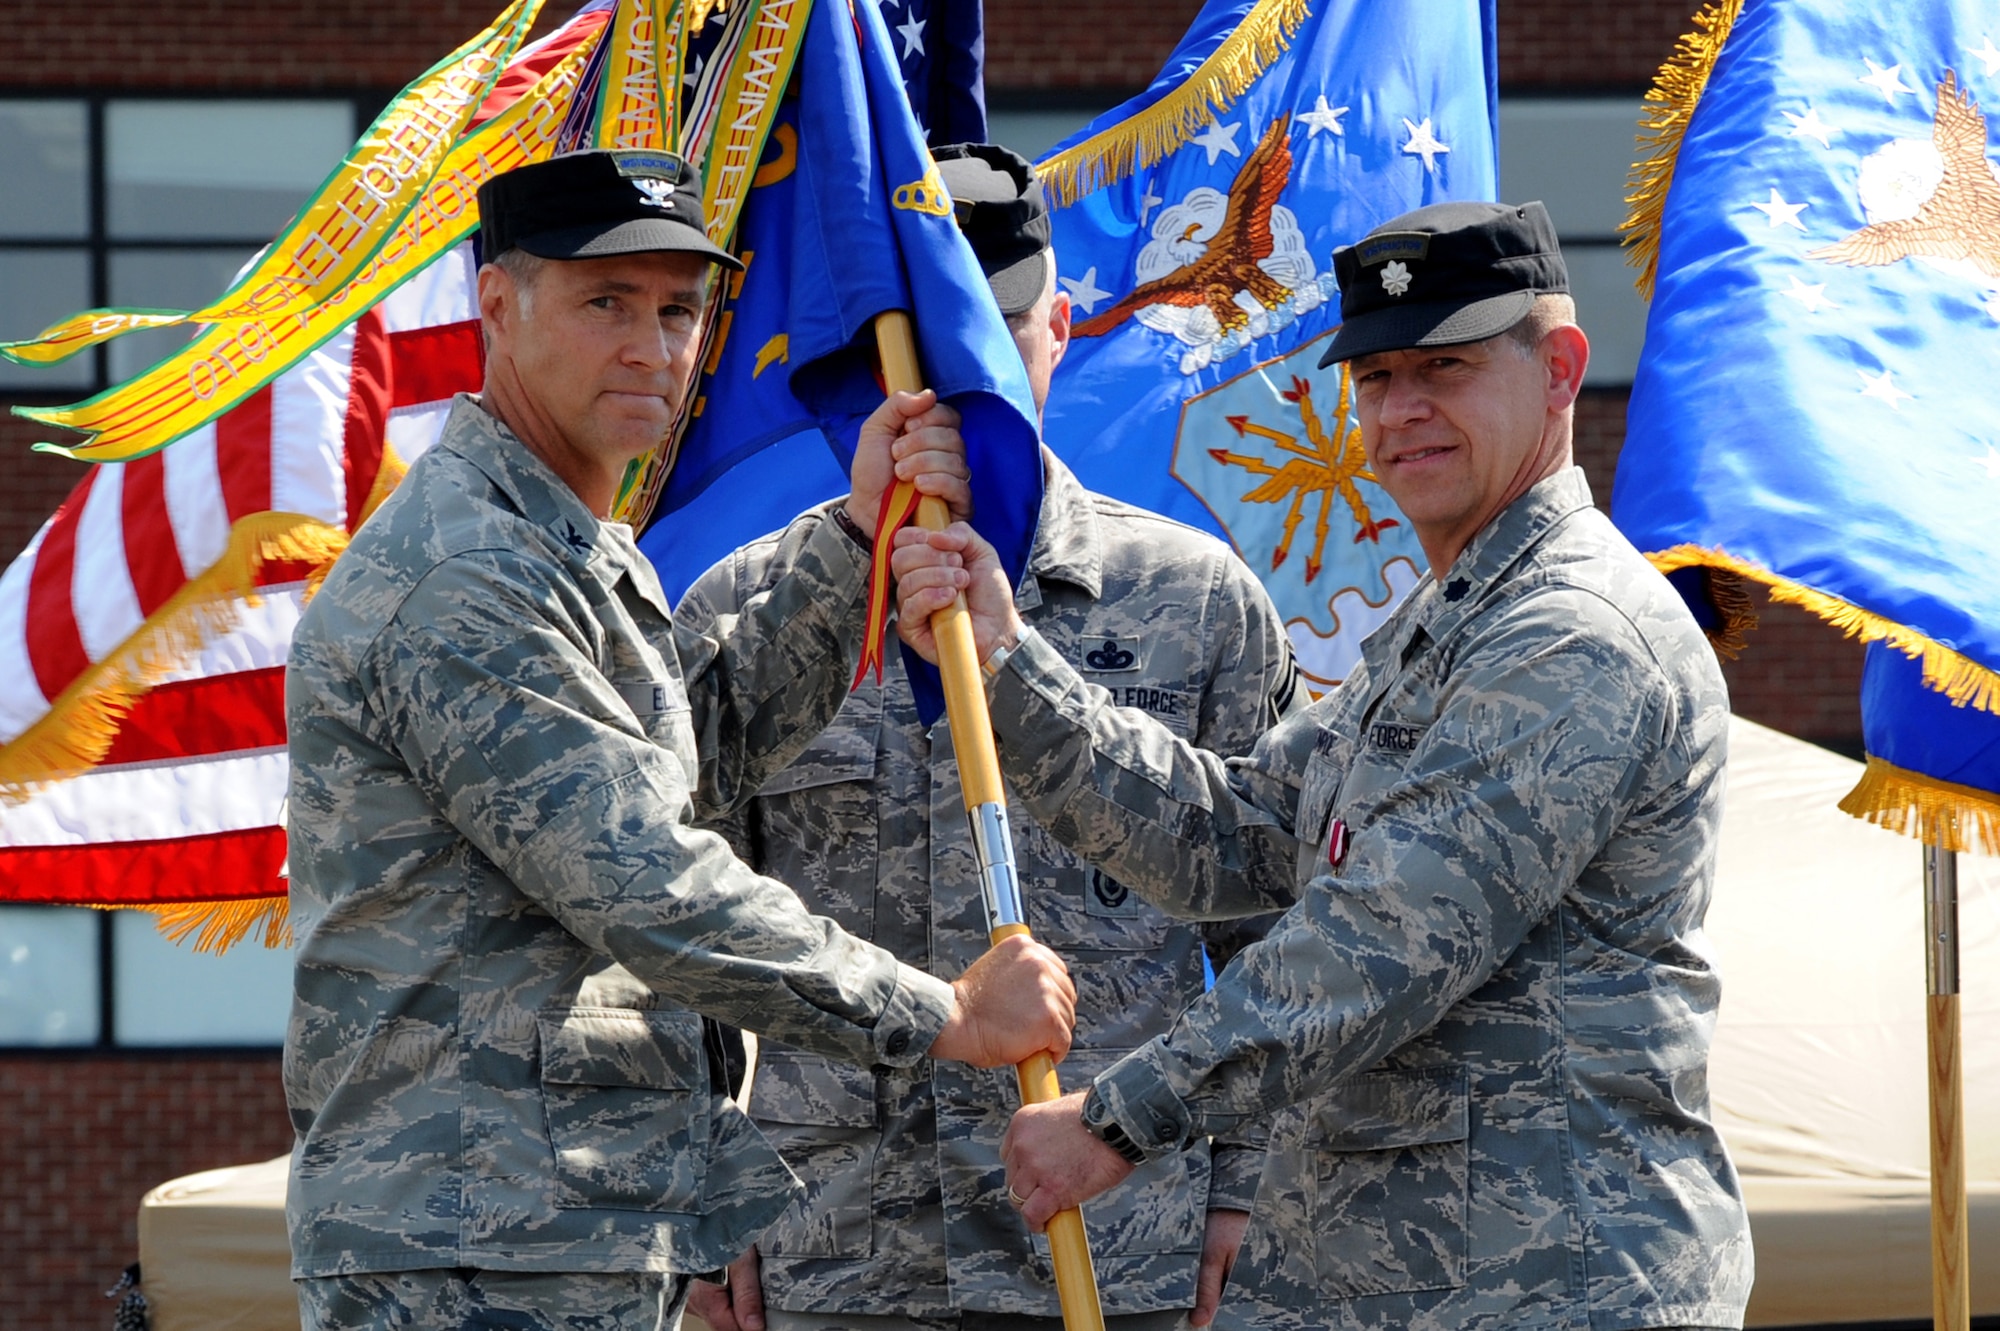 Col. Mark Ellis, Expeditionary Operations School commandant, accepts the 421st Combat Training Squadron guidon July 13 as Lt. Col. Mitchell Monroe relinquishes command during a change of command ceremony at Joint Base McGuire-Dix-Lakehurst, N.J.  Lt. Col. David Lenderman will assume command of the 421st CTS housed at the U.S. Air Force Expeditionary Center on Fort Dix. (U.S. Air Force Photo/Staff Sgt. Nathan G. Bevier) 